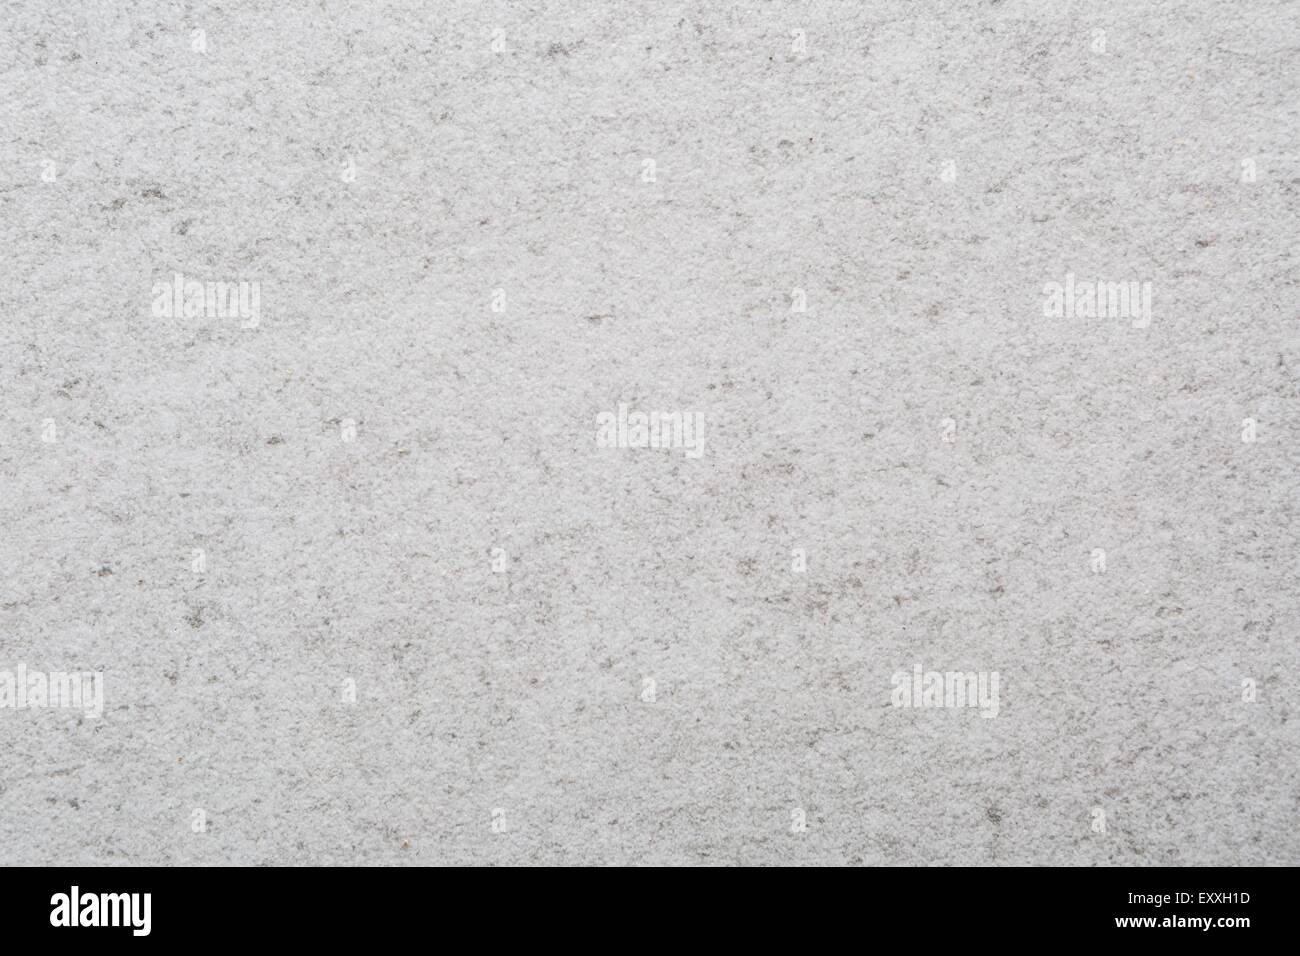 Close up of stone. Grungy texture useful as background. Stock Photo